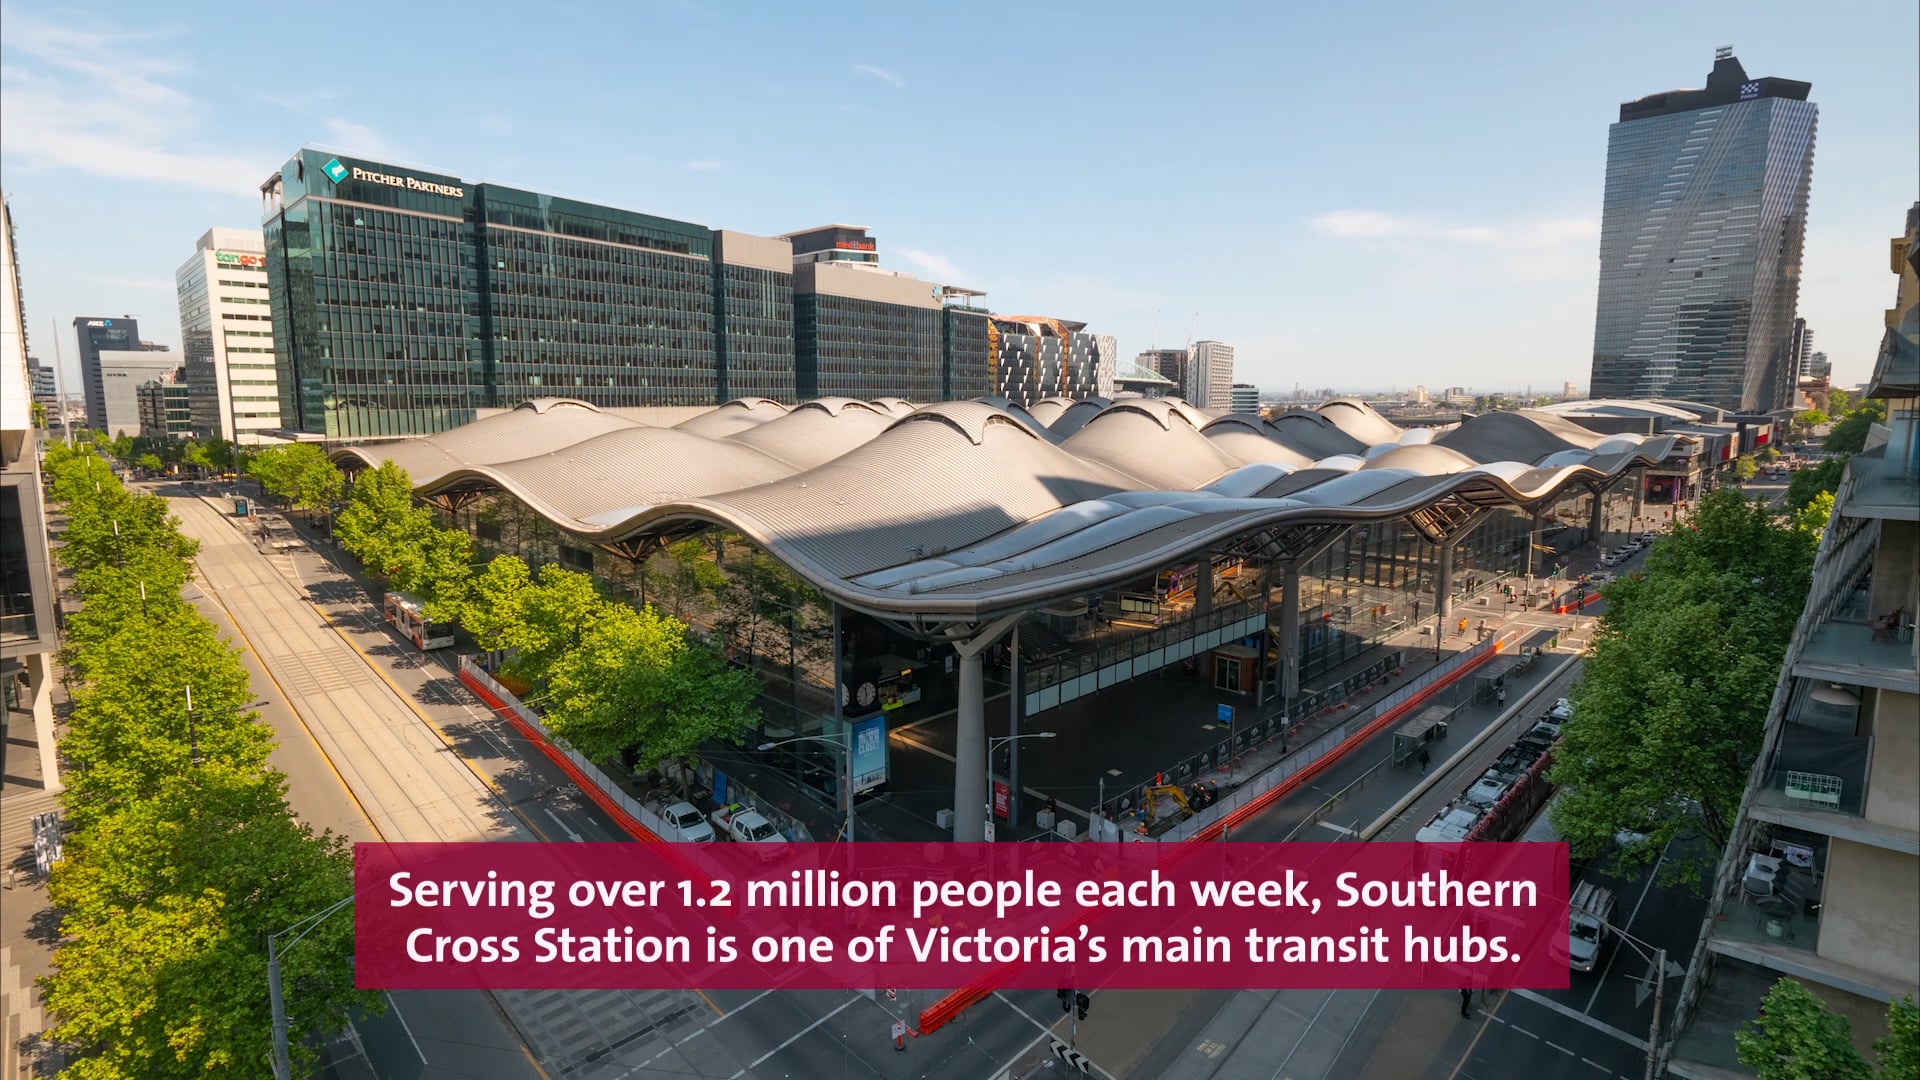 Southern Cross Station enhancement works